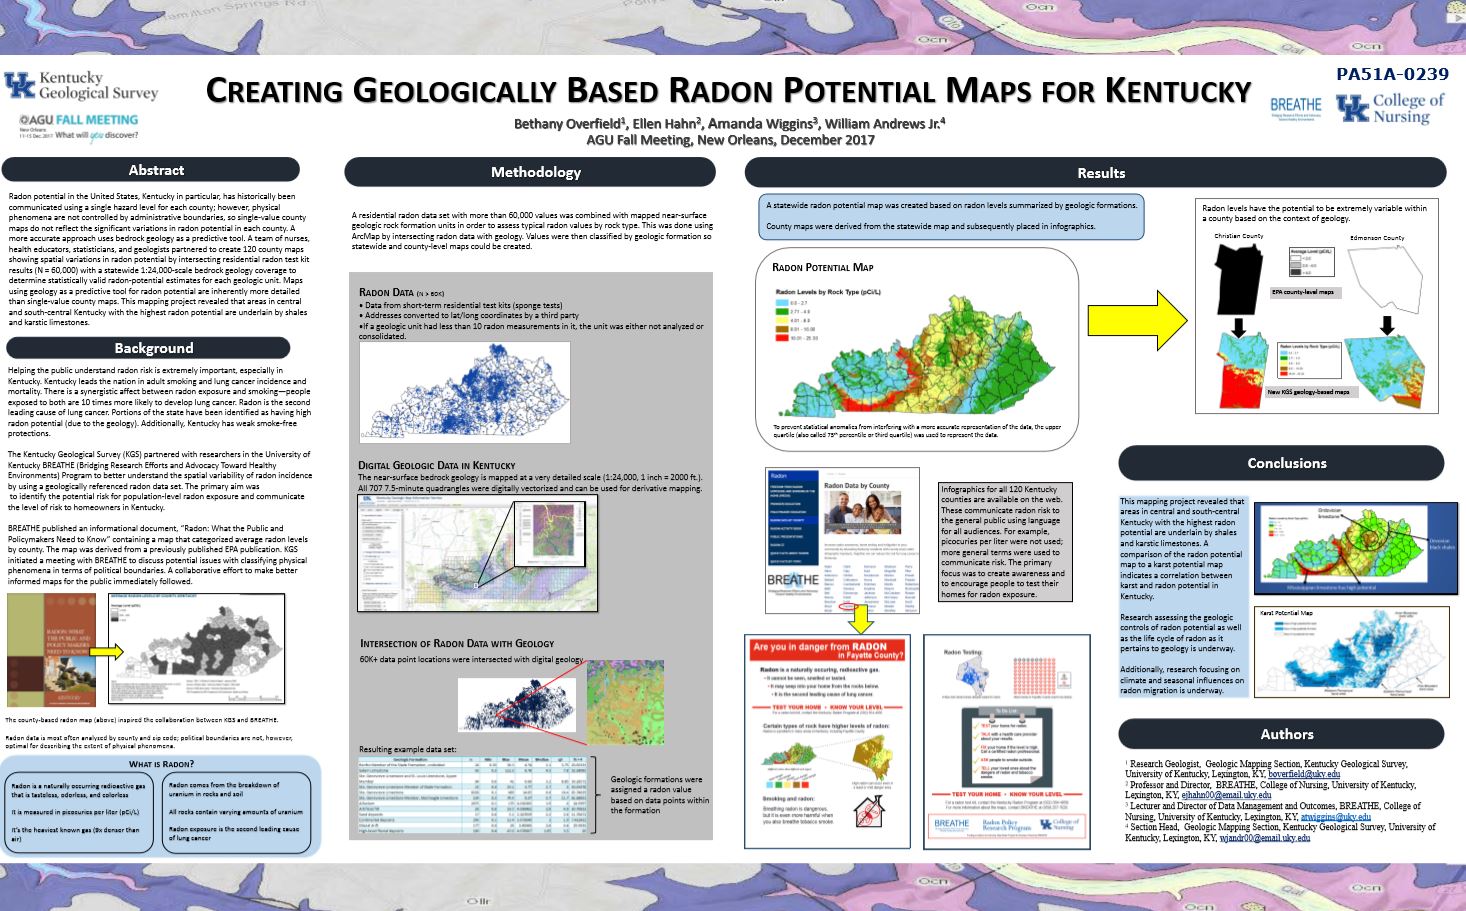 Creating Geologically Based Radon Potential Maps for Kentucky